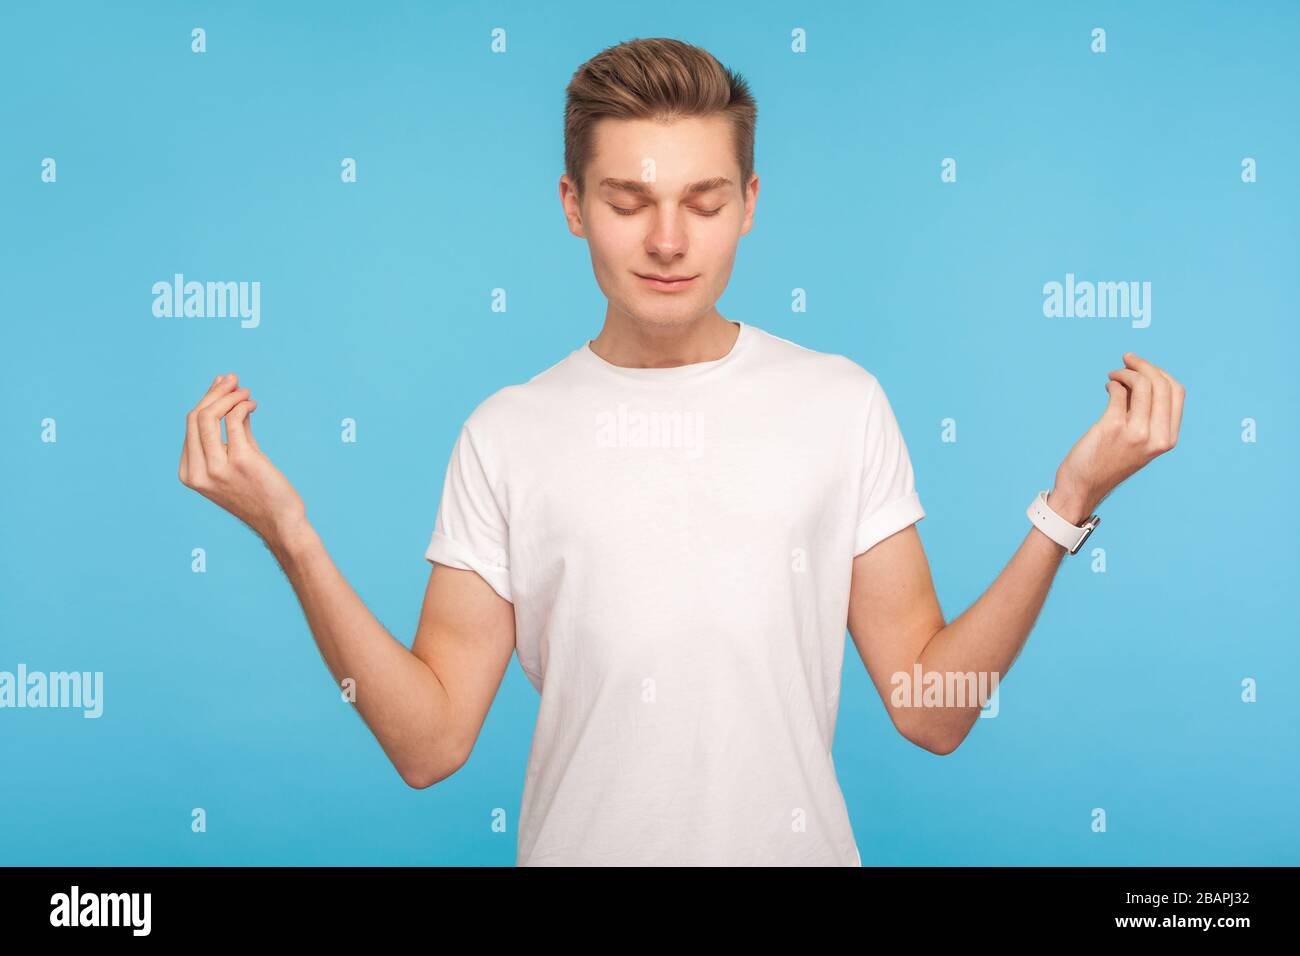 Relaxation, mind harmony. Portrait of man in casual white t-shirt holding arms in mudra gesture and meditating with peaceful expression, practicing yo Stock Photo